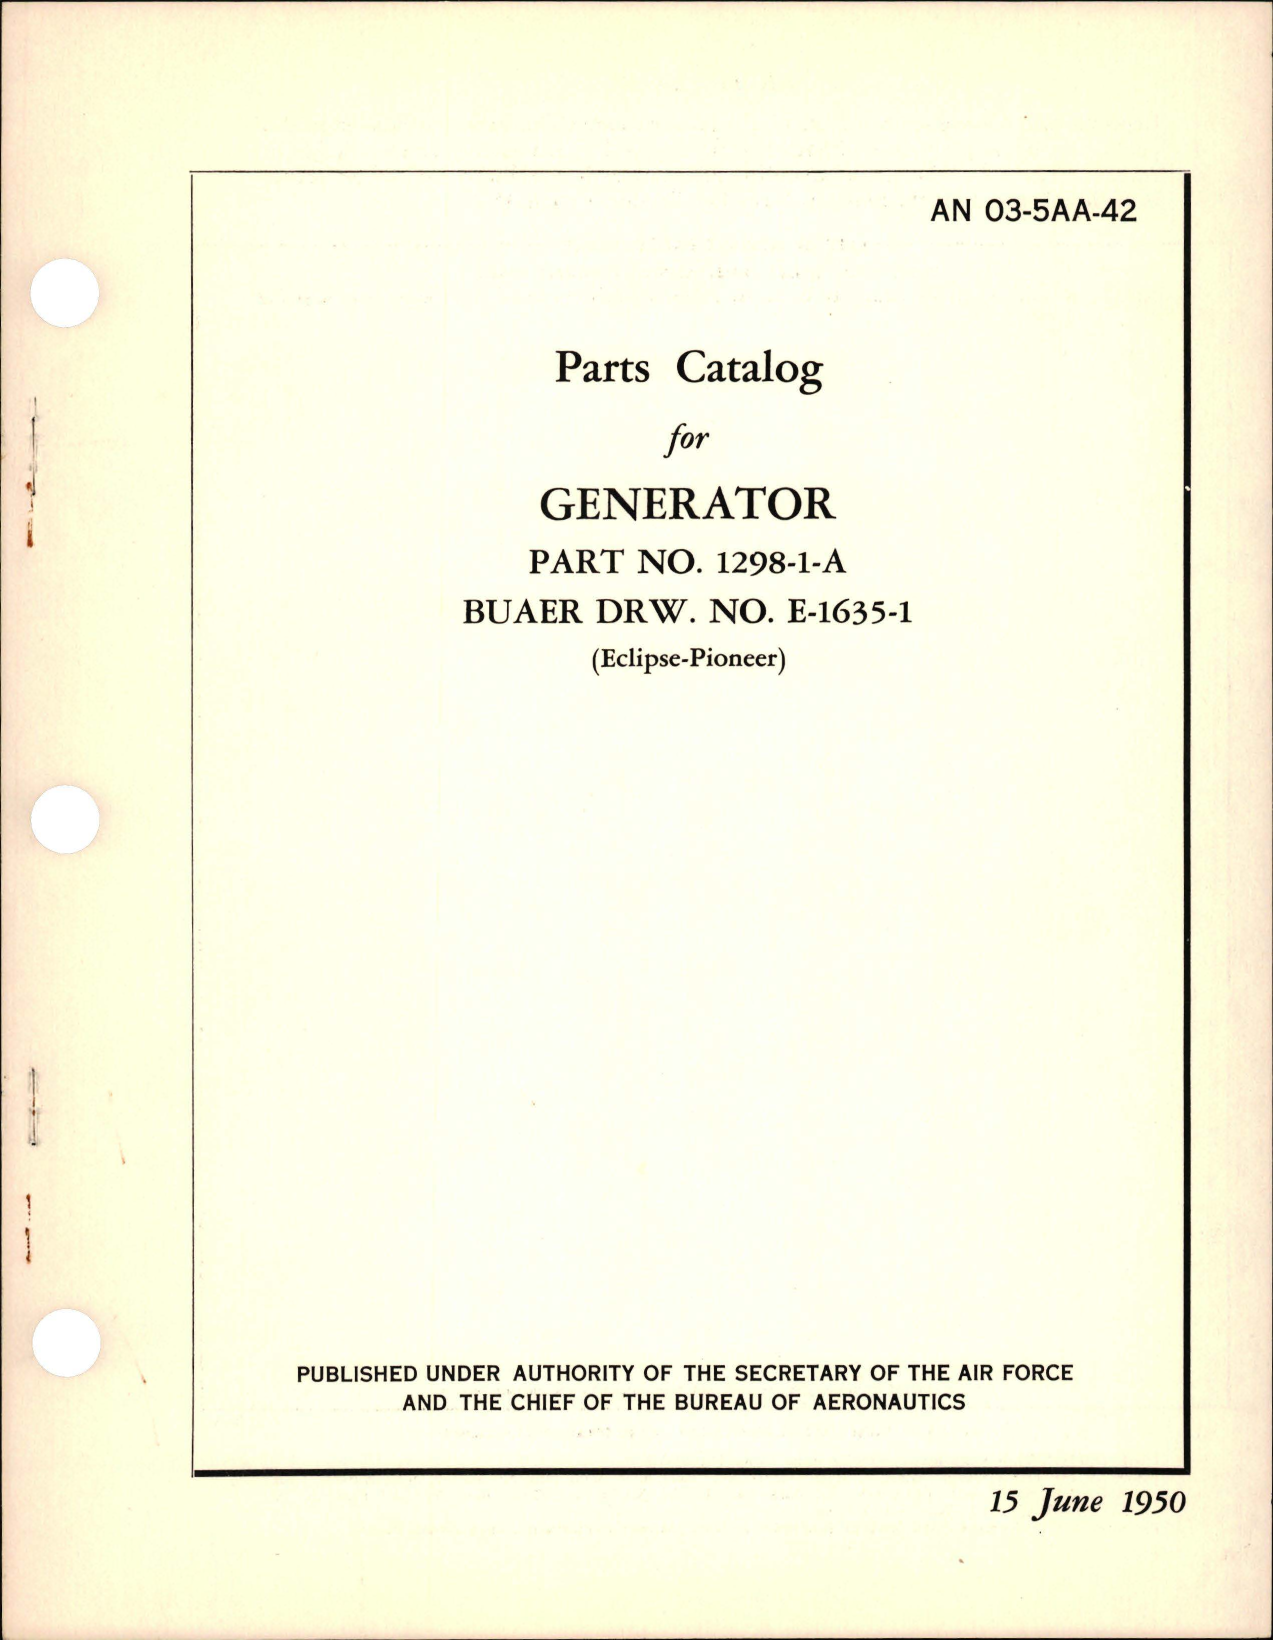 Sample page 1 from AirCorps Library document: Parts Catalog for Generator - Part 1298-1-A - Buaer DRW No. E-1635-1